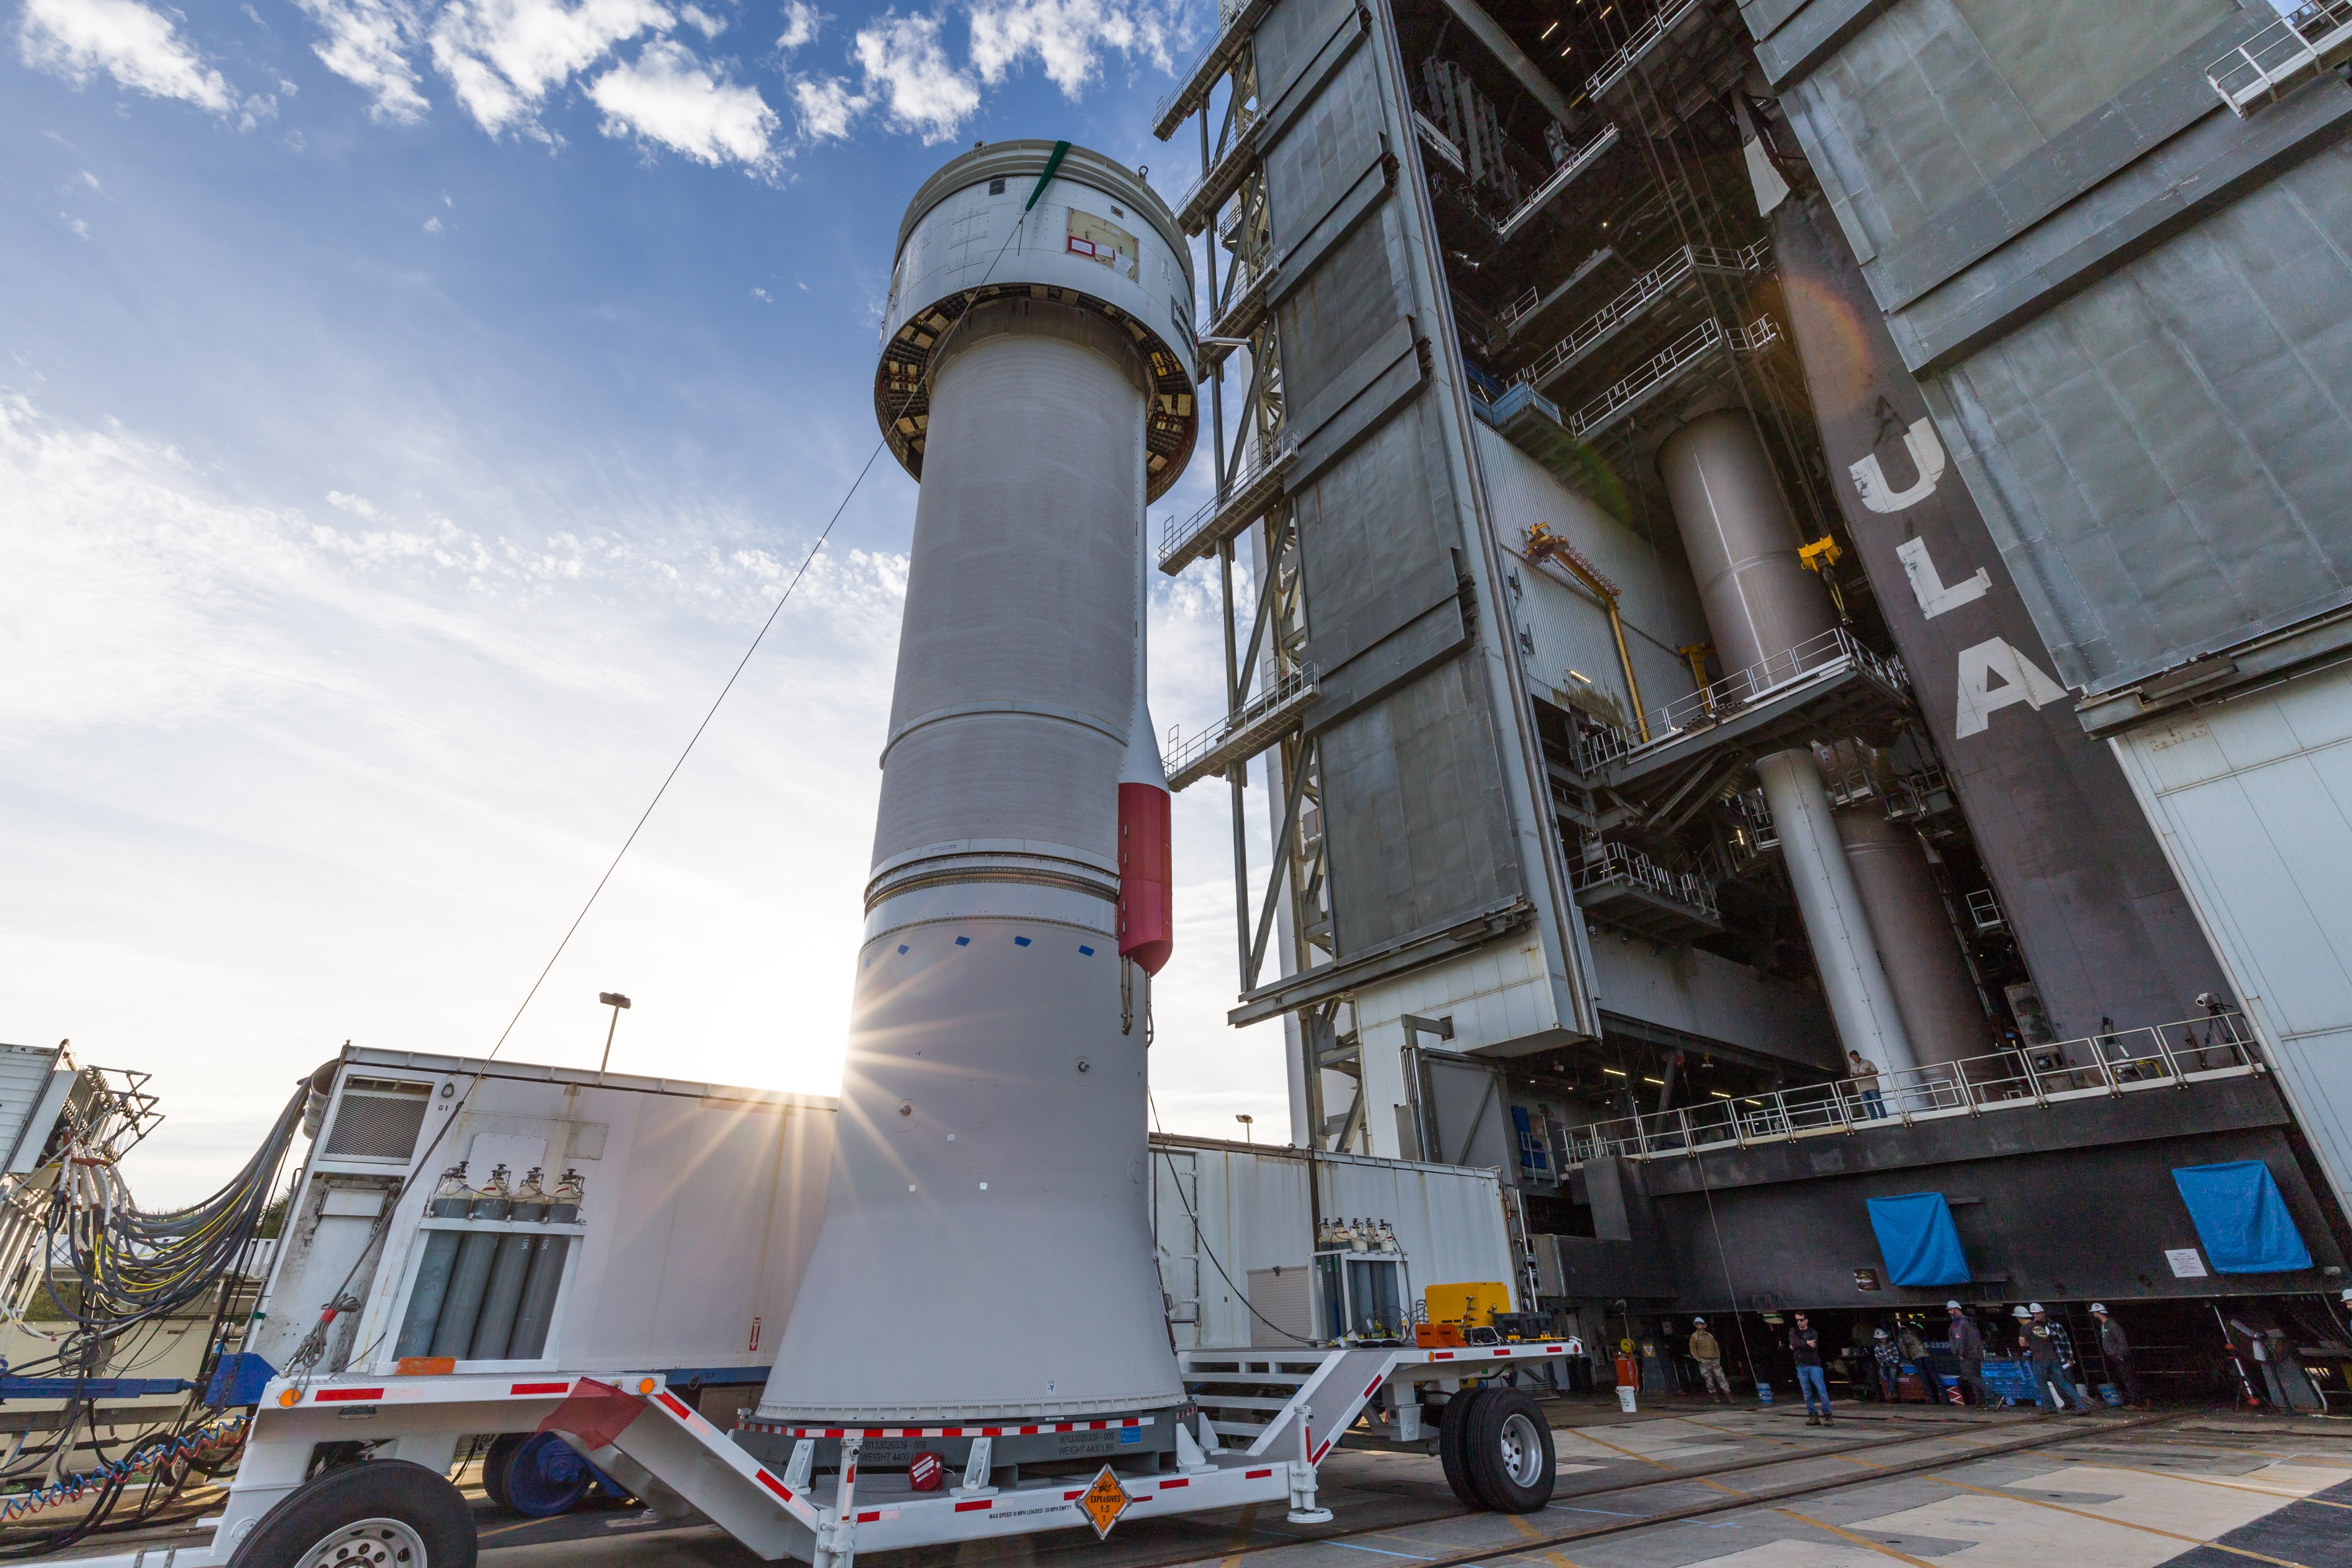 The Centaur assembly for the CFT launch arrives at the Vertical Integration Facility to be placed atop the Atlas V first stage. Photo by United Launch Alliance